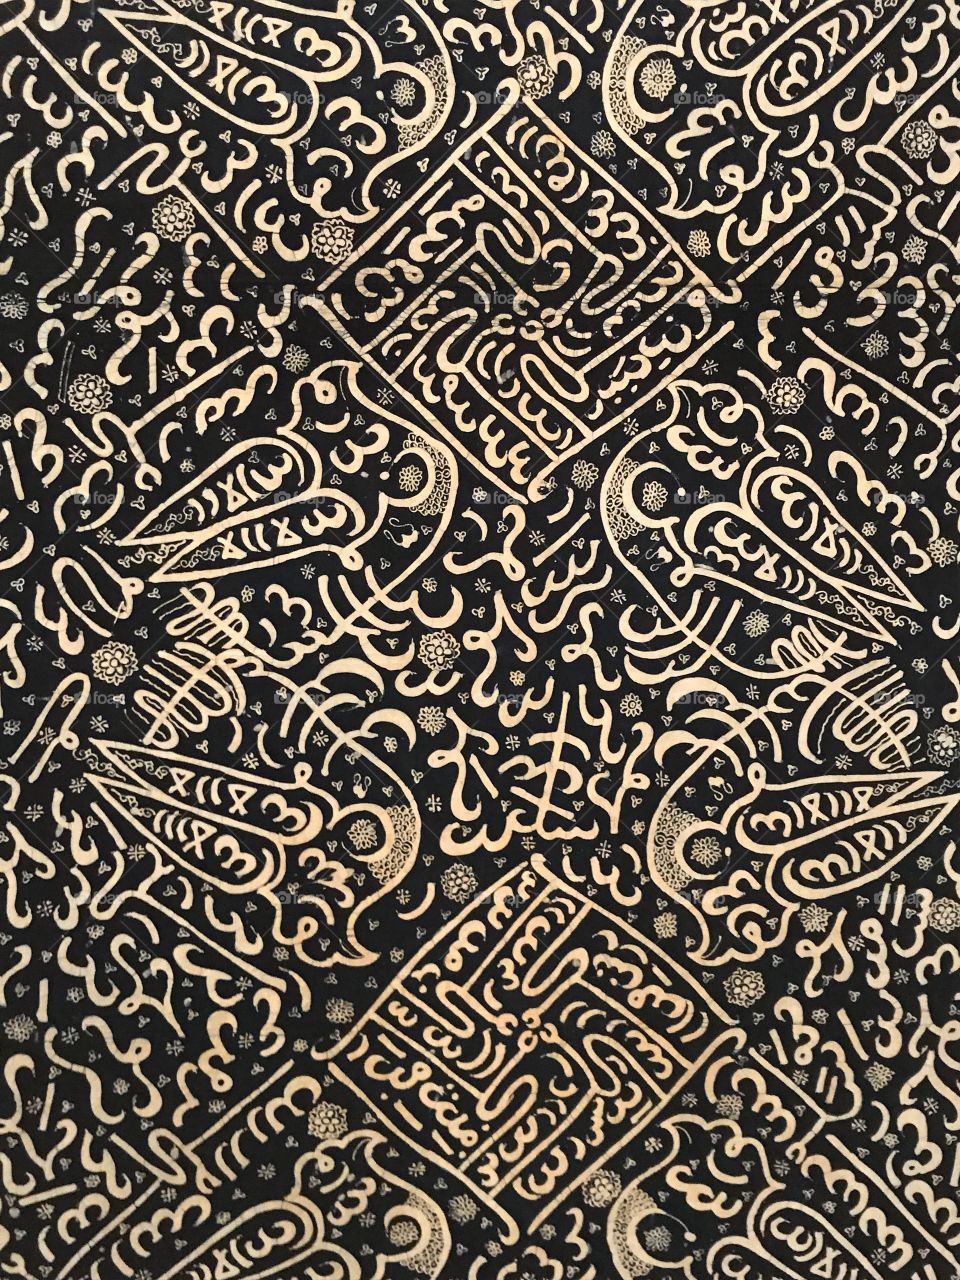 Middle Eastern Print